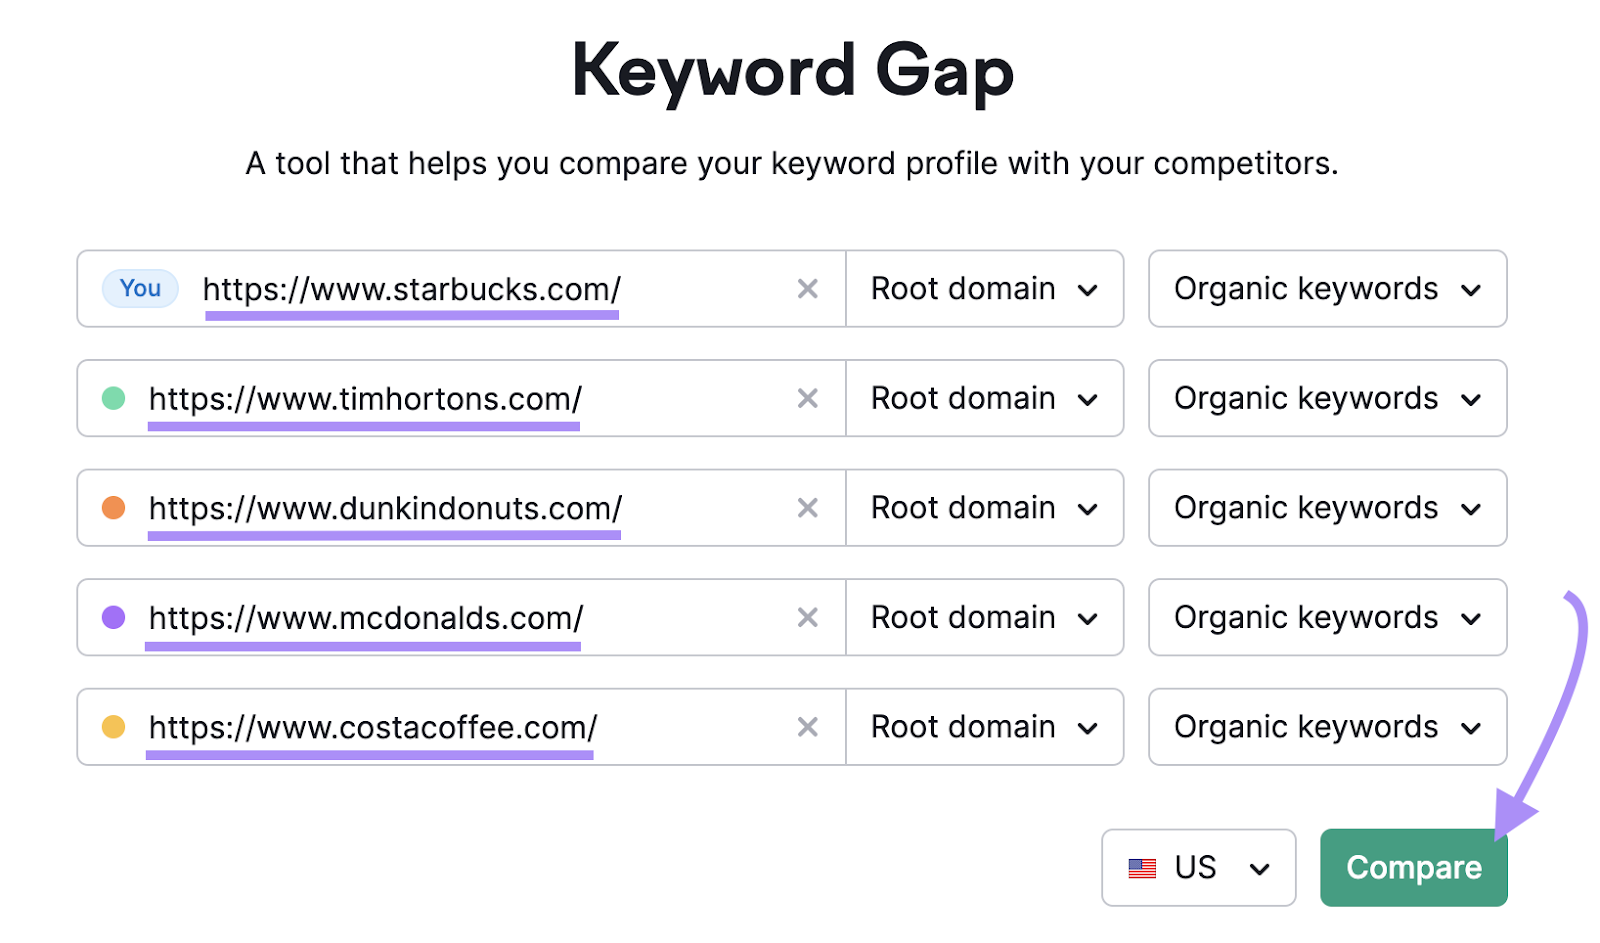 "starbucks.com" and four compe،ors entered into the Keyword Gap tool search bars